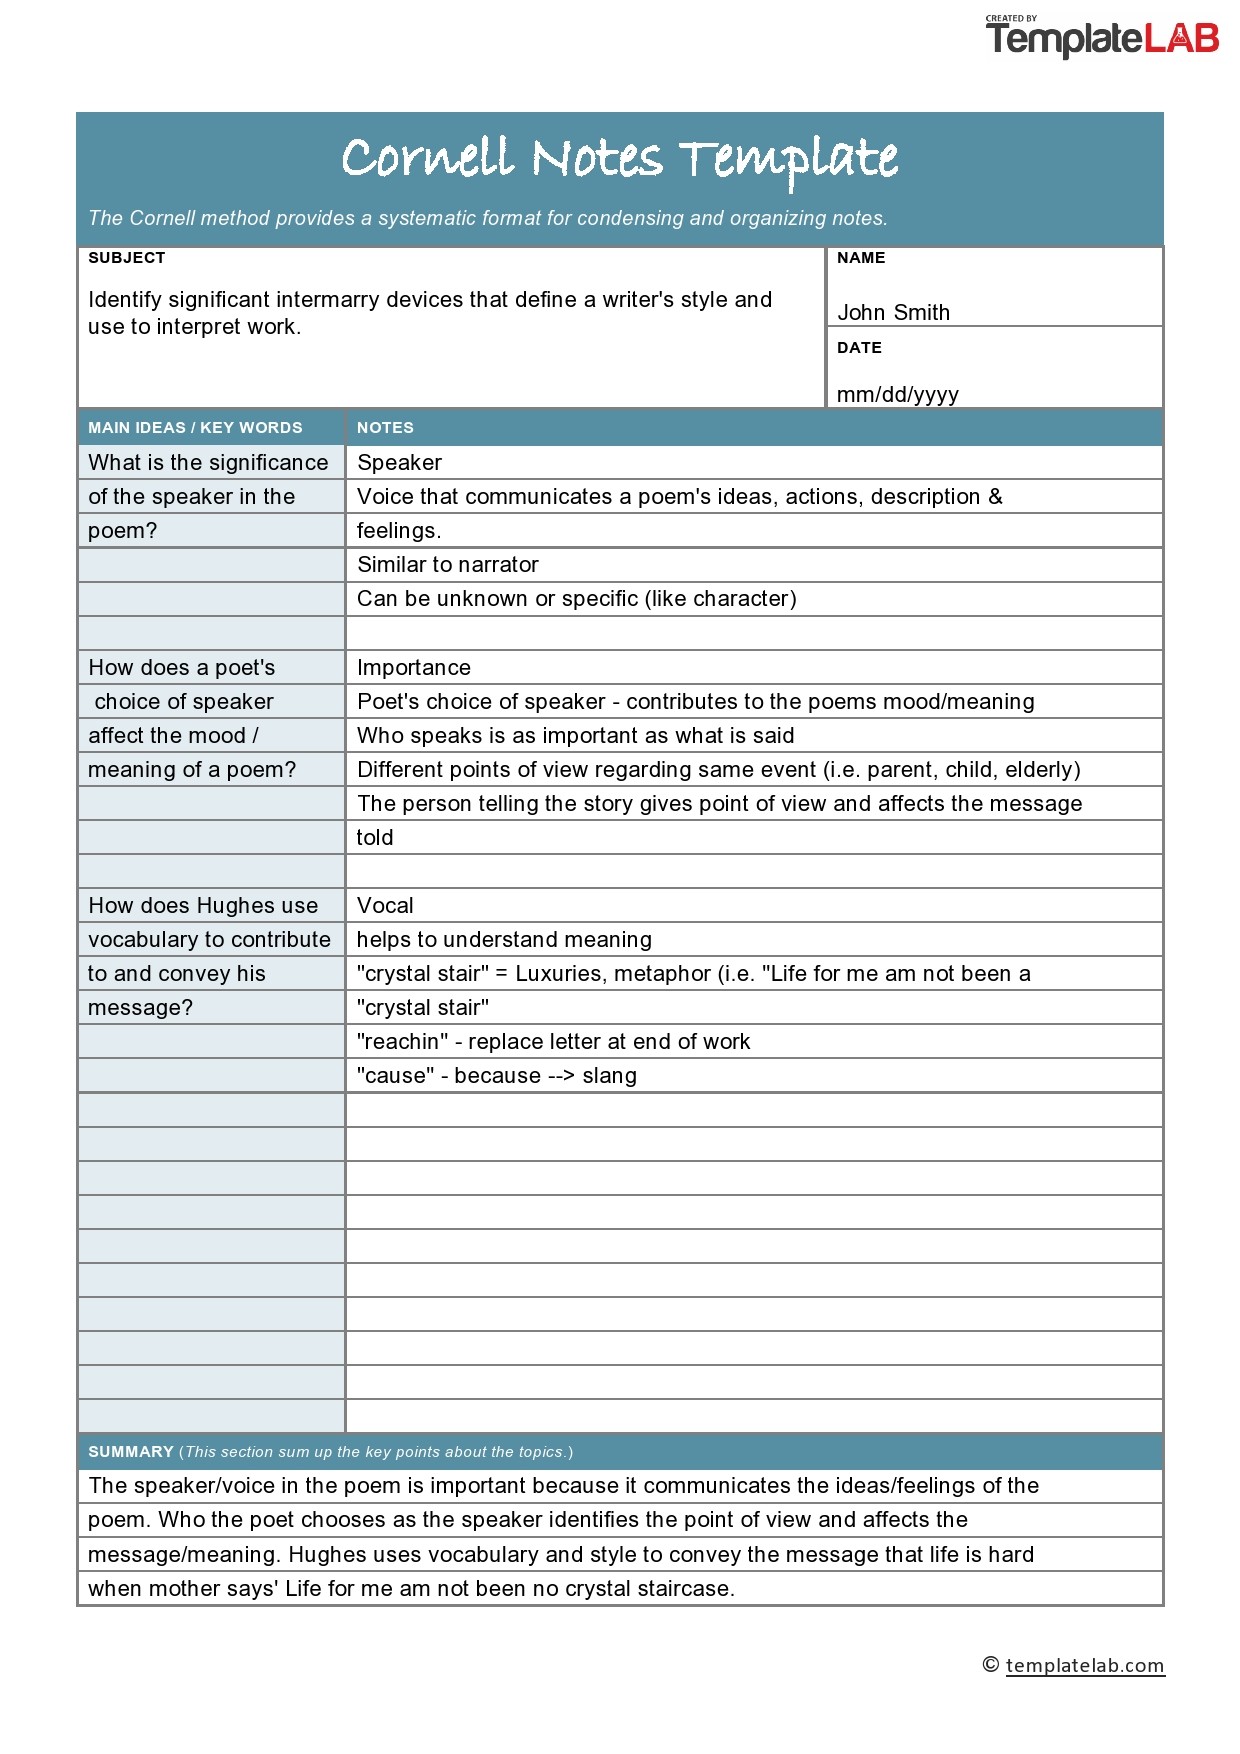 37-cornell-notes-templates-examples-word-excel-pdf